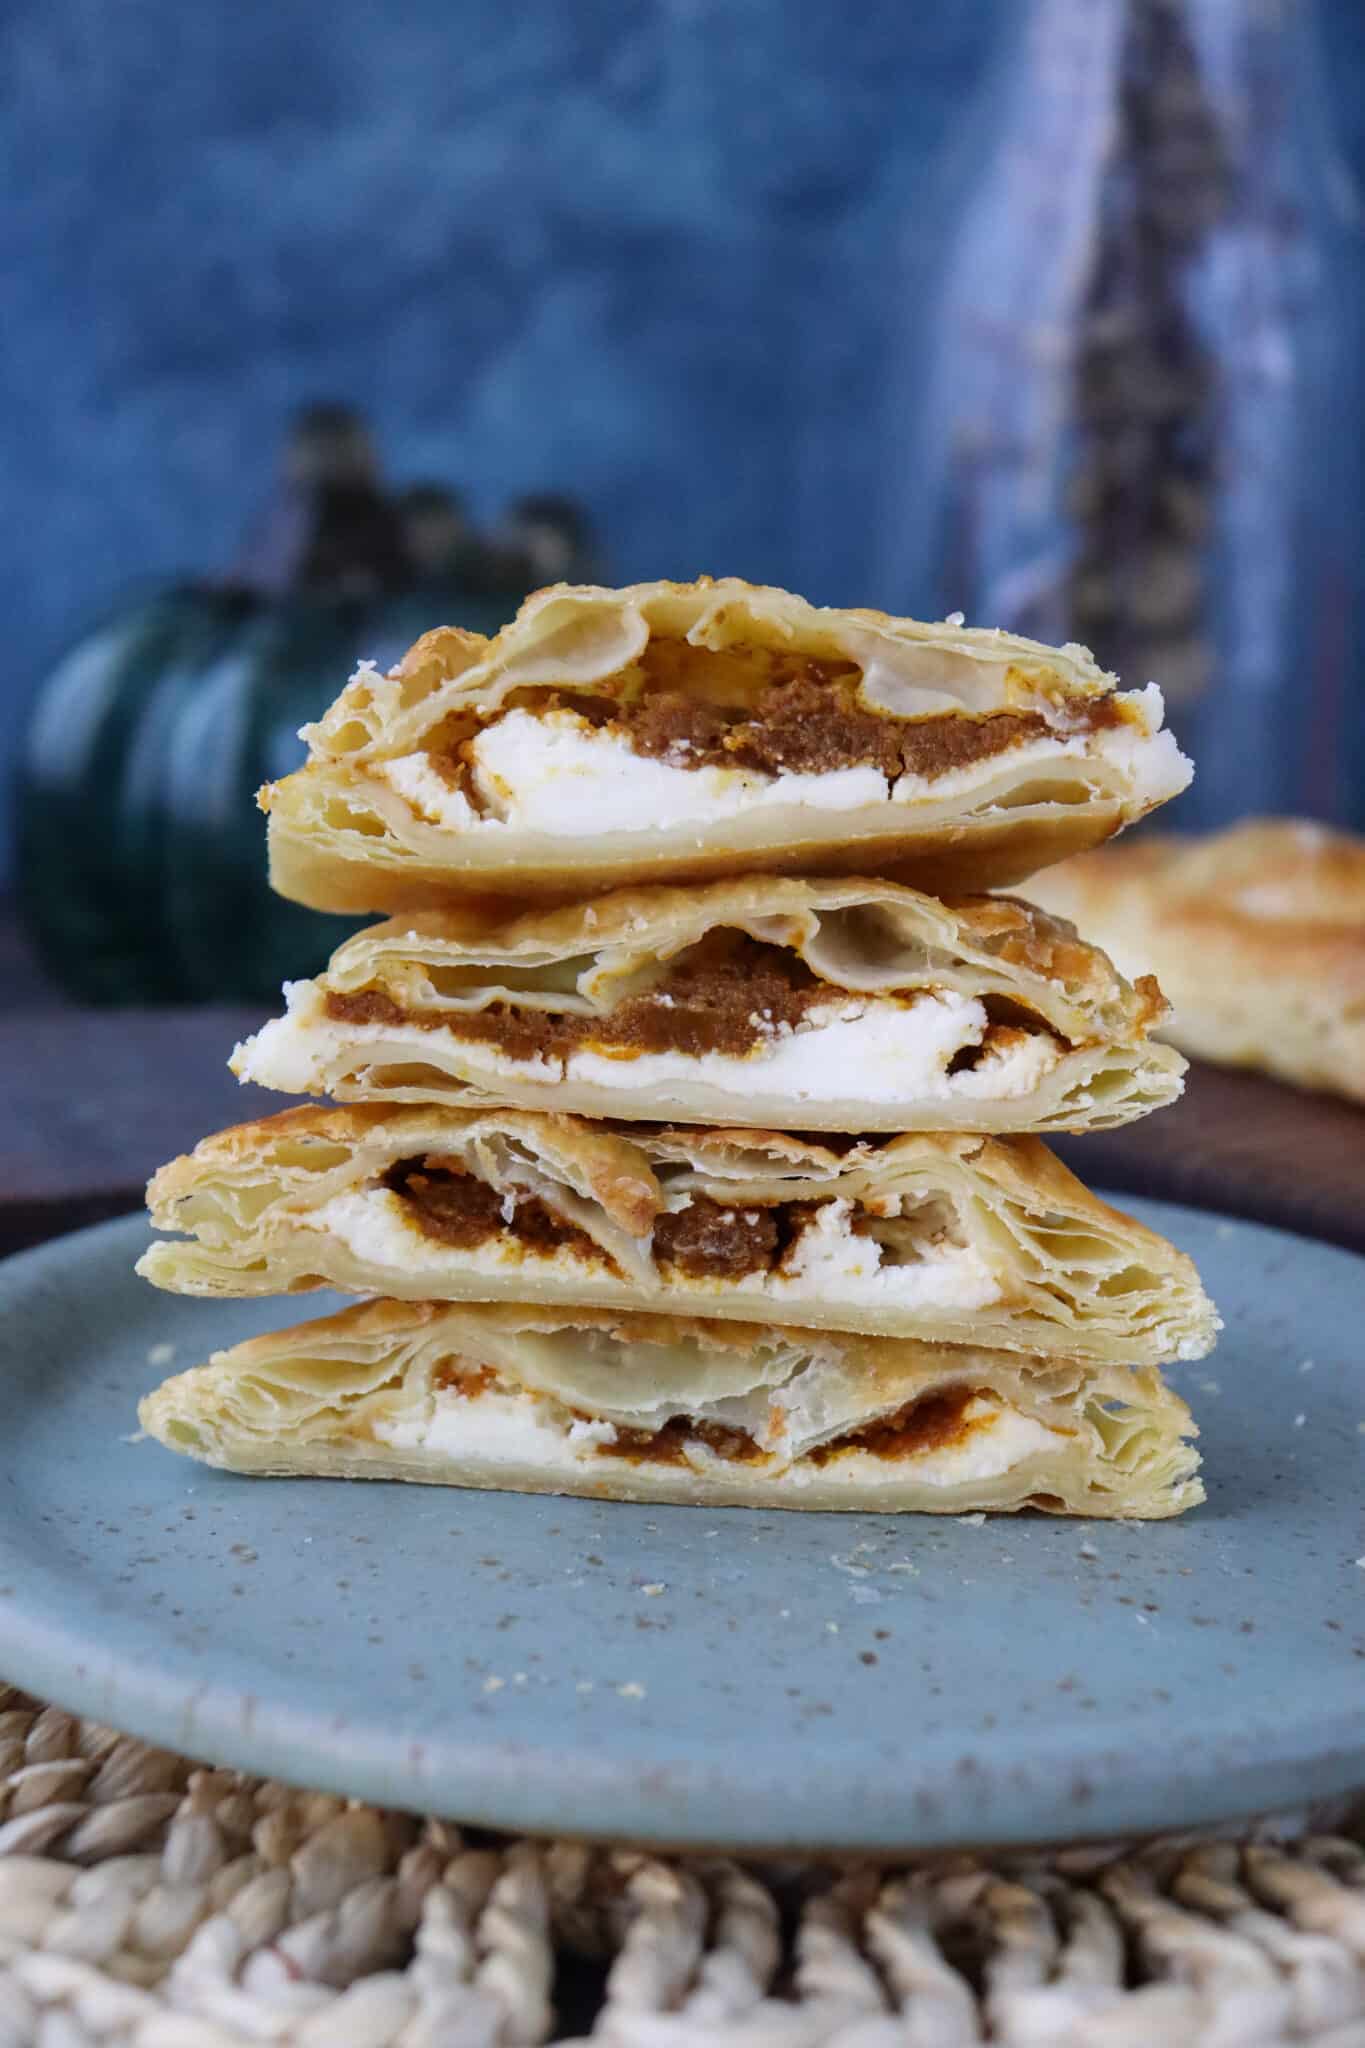 Pumpkin pie pastelitos stacked on a blue plate.